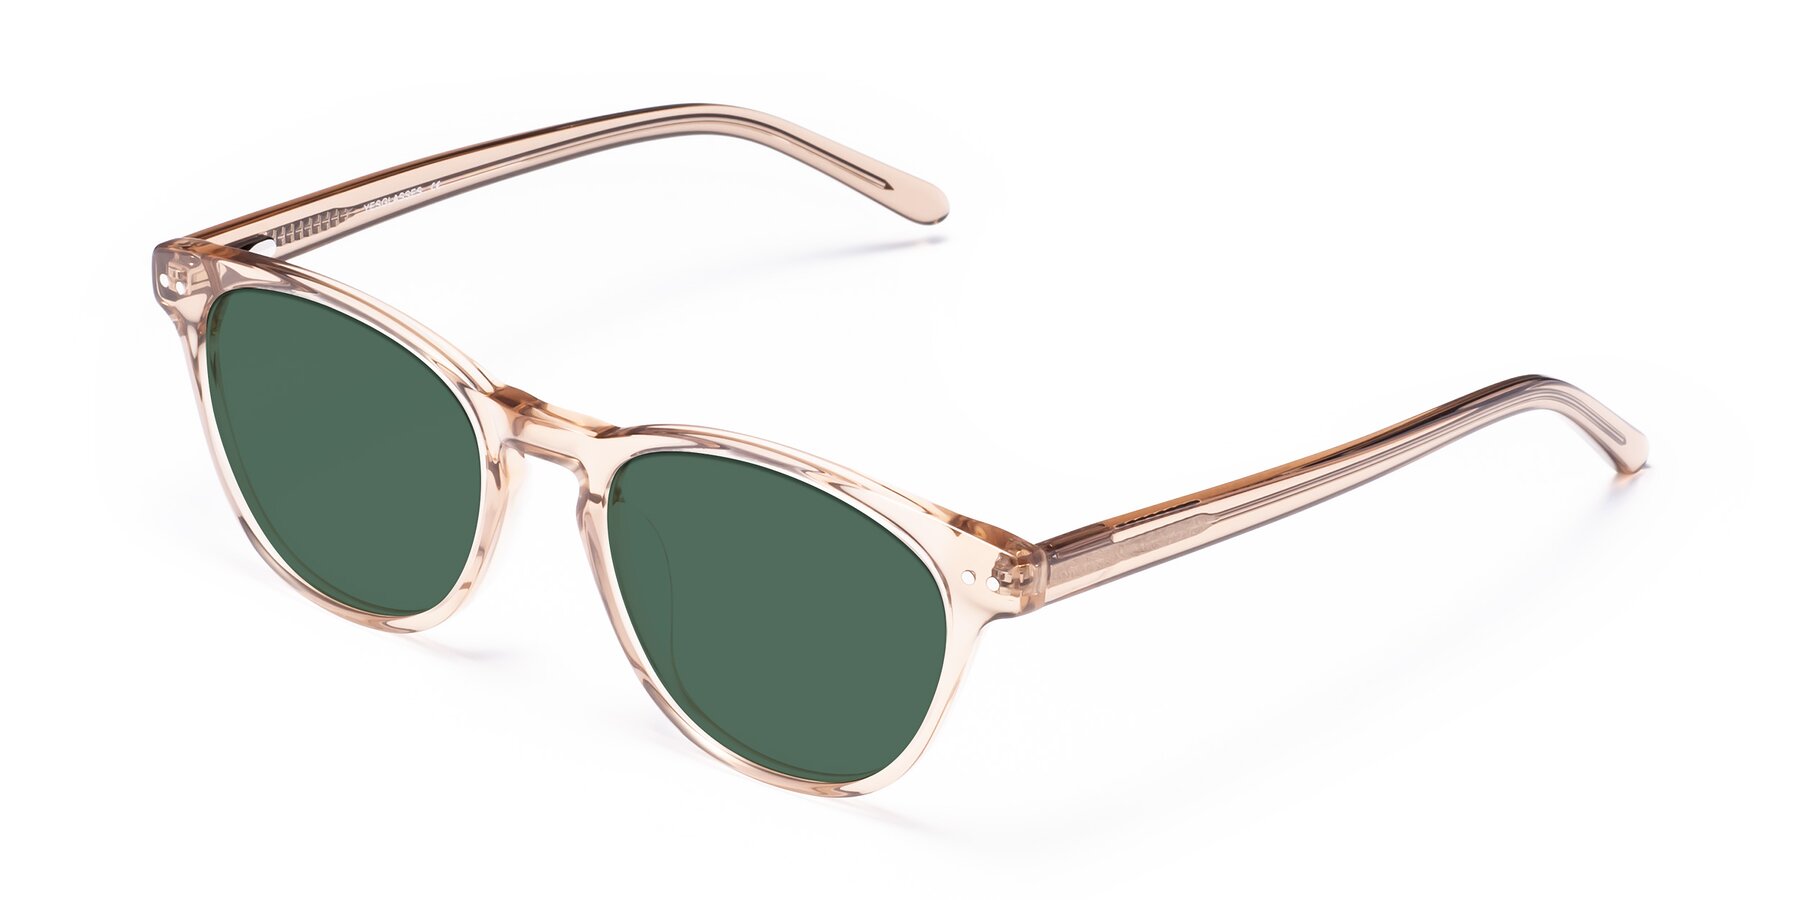 Angle of Blaze in light Brown with Green Polarized Lenses